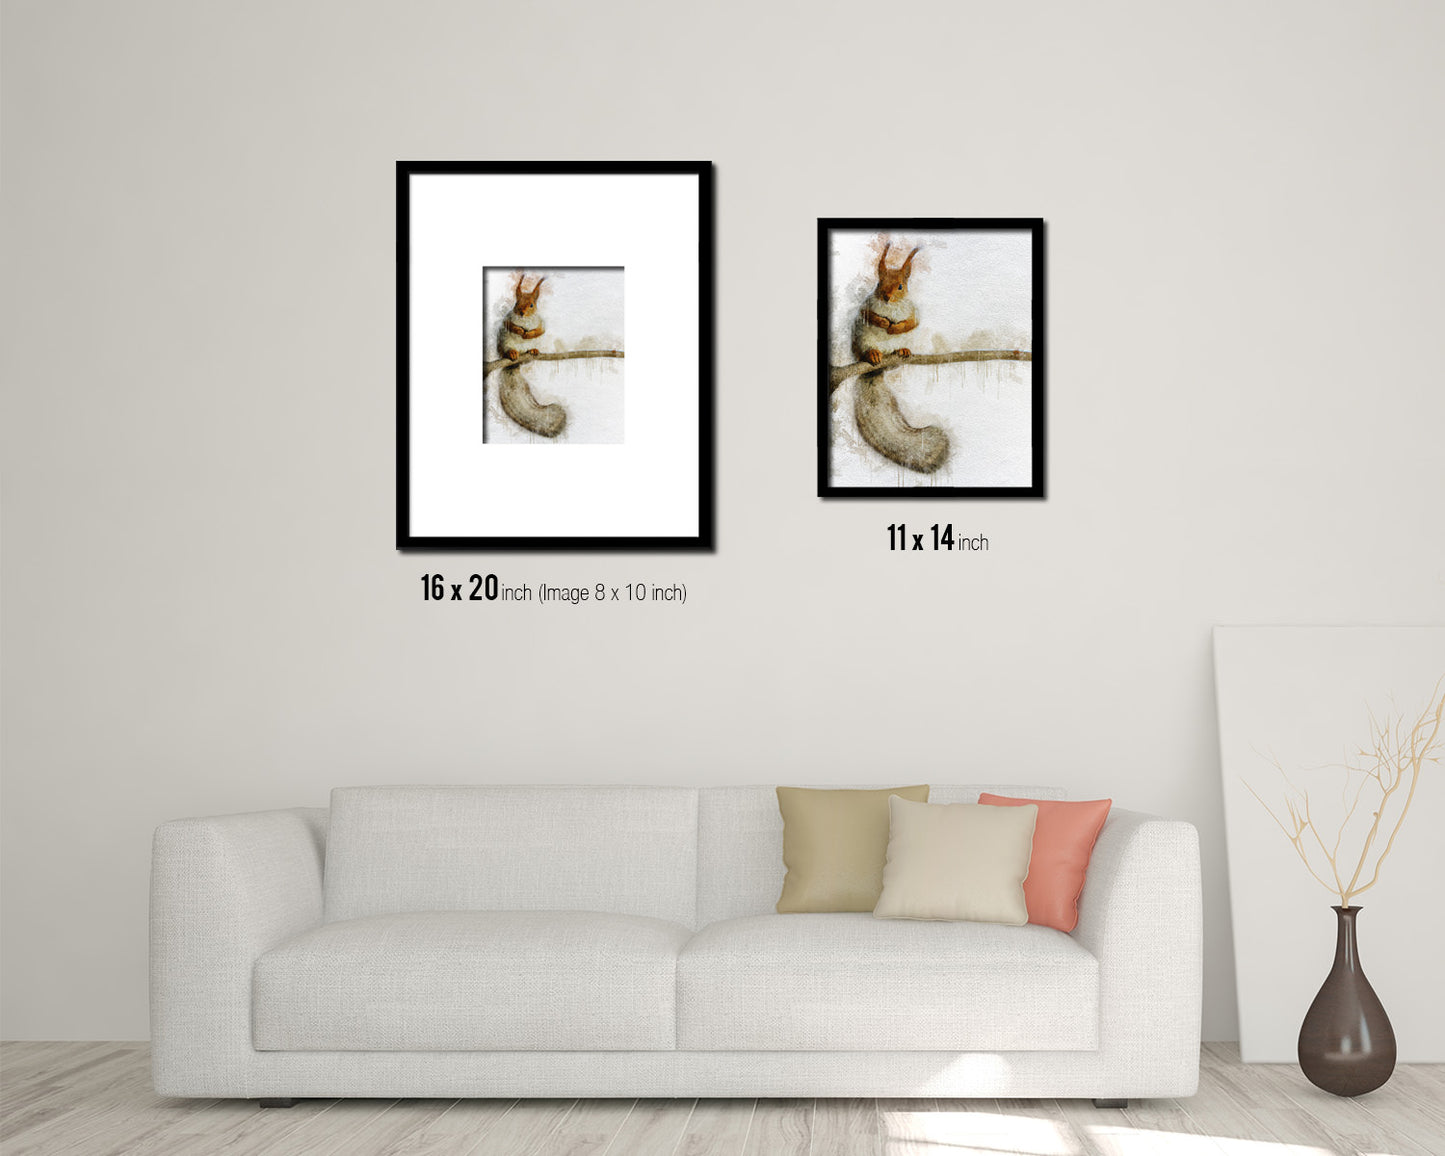 Red squirrel Animal Painting Print Framed Art Home Wall Decor Gifts